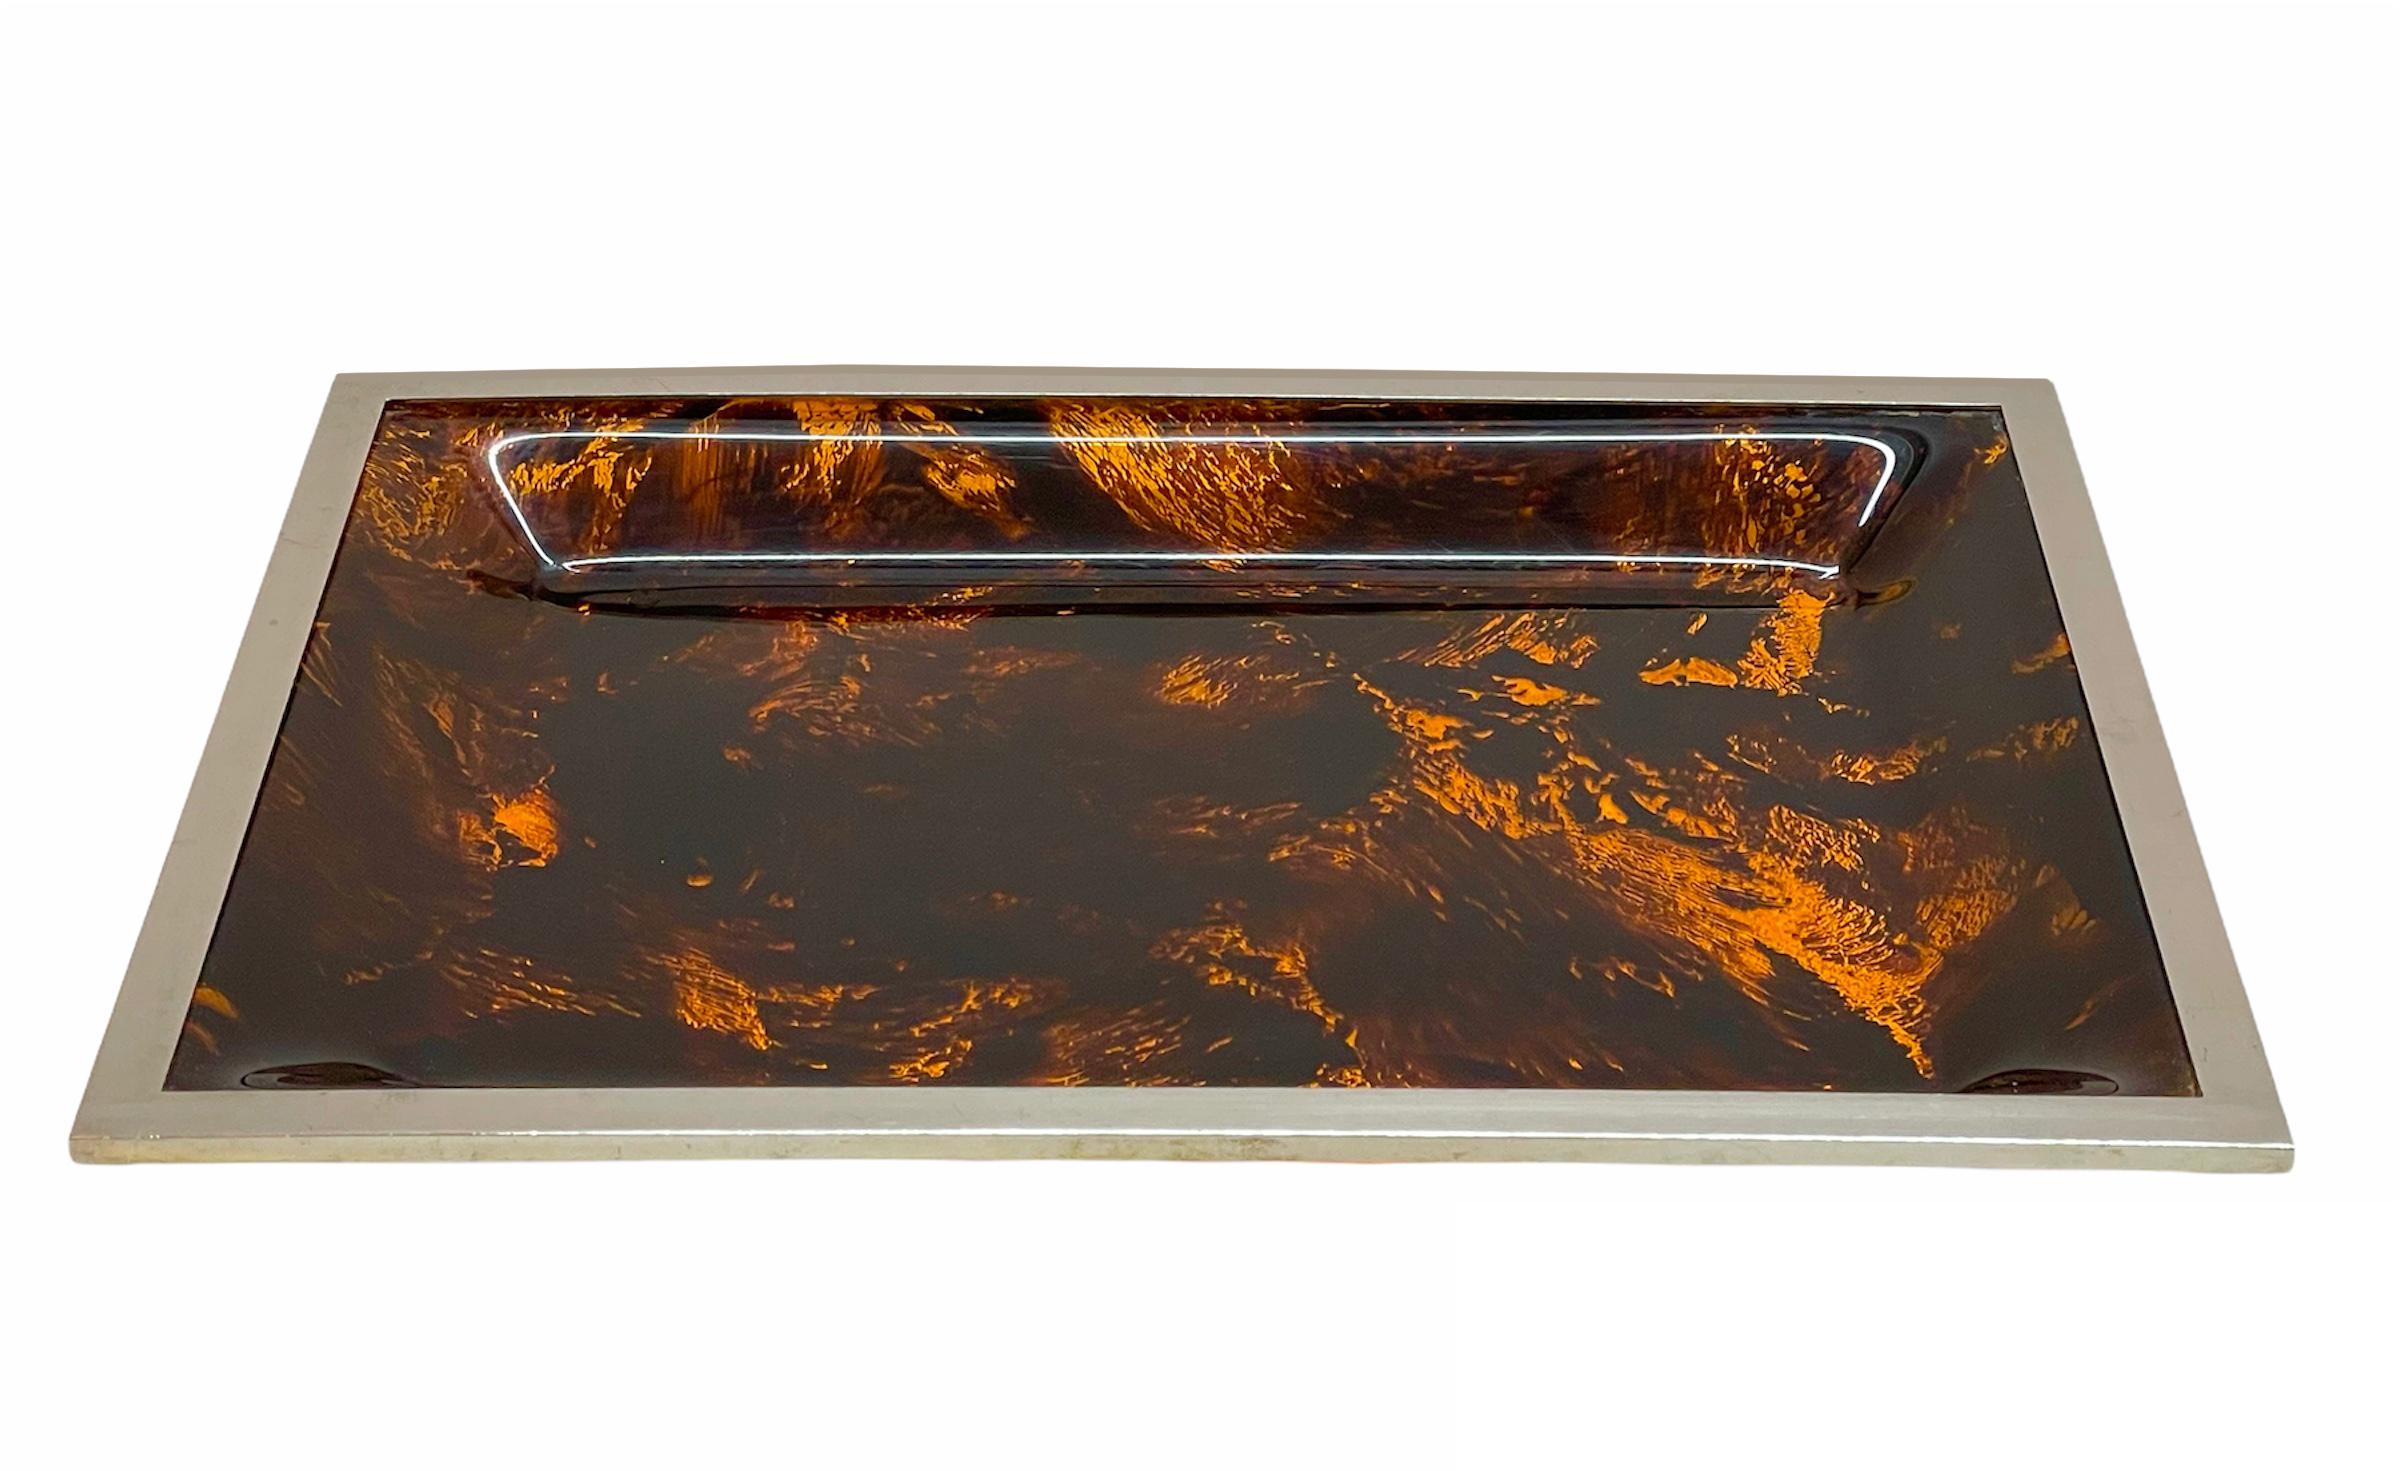 Midcentury Tortoiseshell Plexiglass Italian Serving Tray after Willy Rizzo 1970s For Sale 8